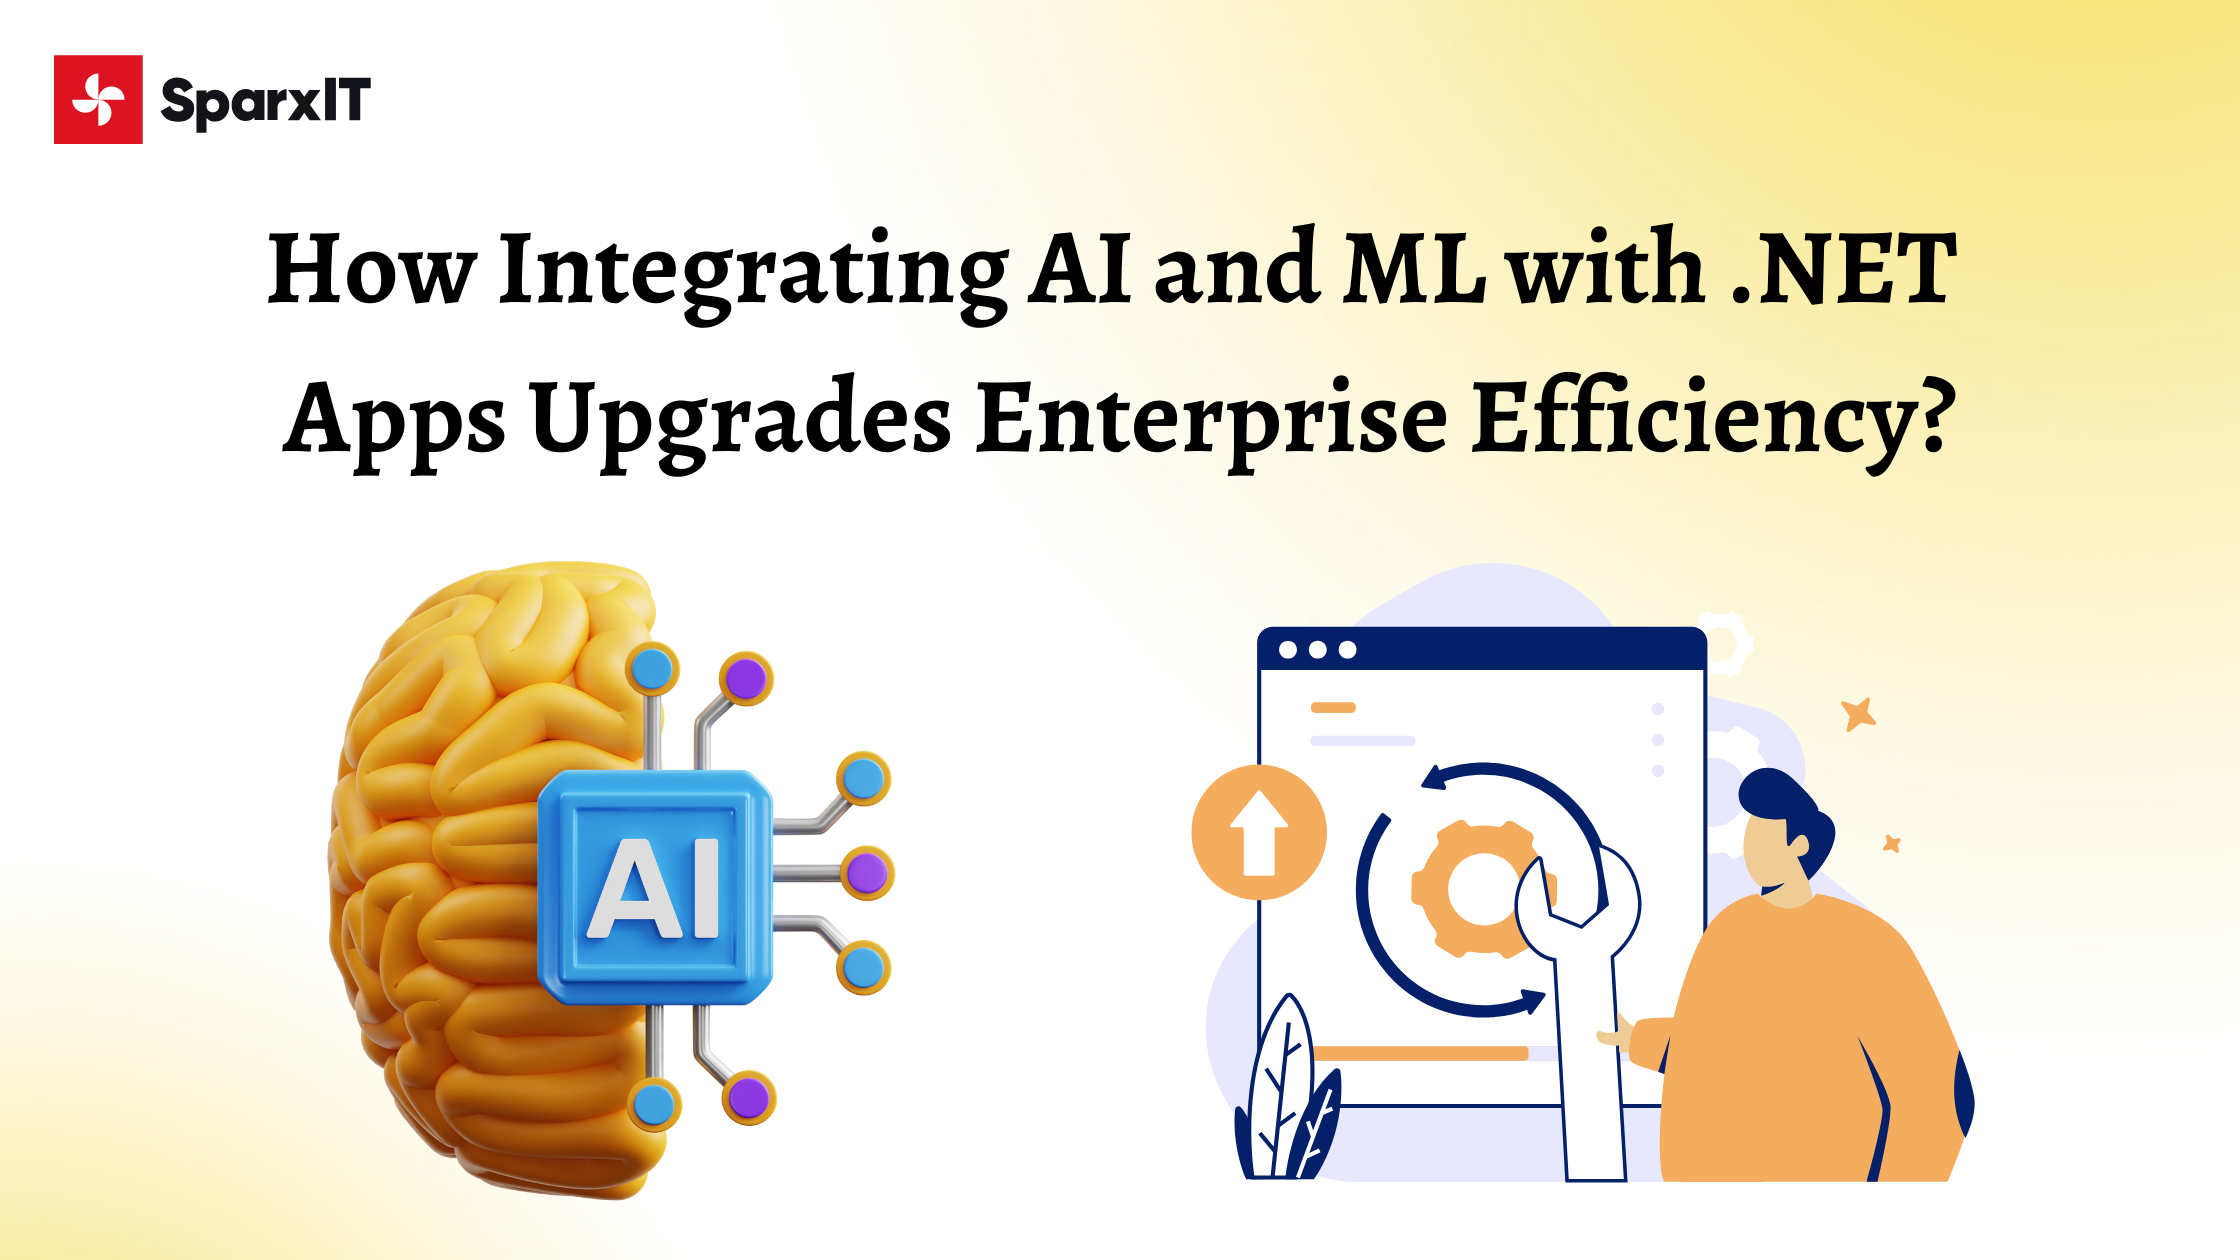 How Integrating AI and ML with .NET Apps Upgrades Enterprise Efficiency?